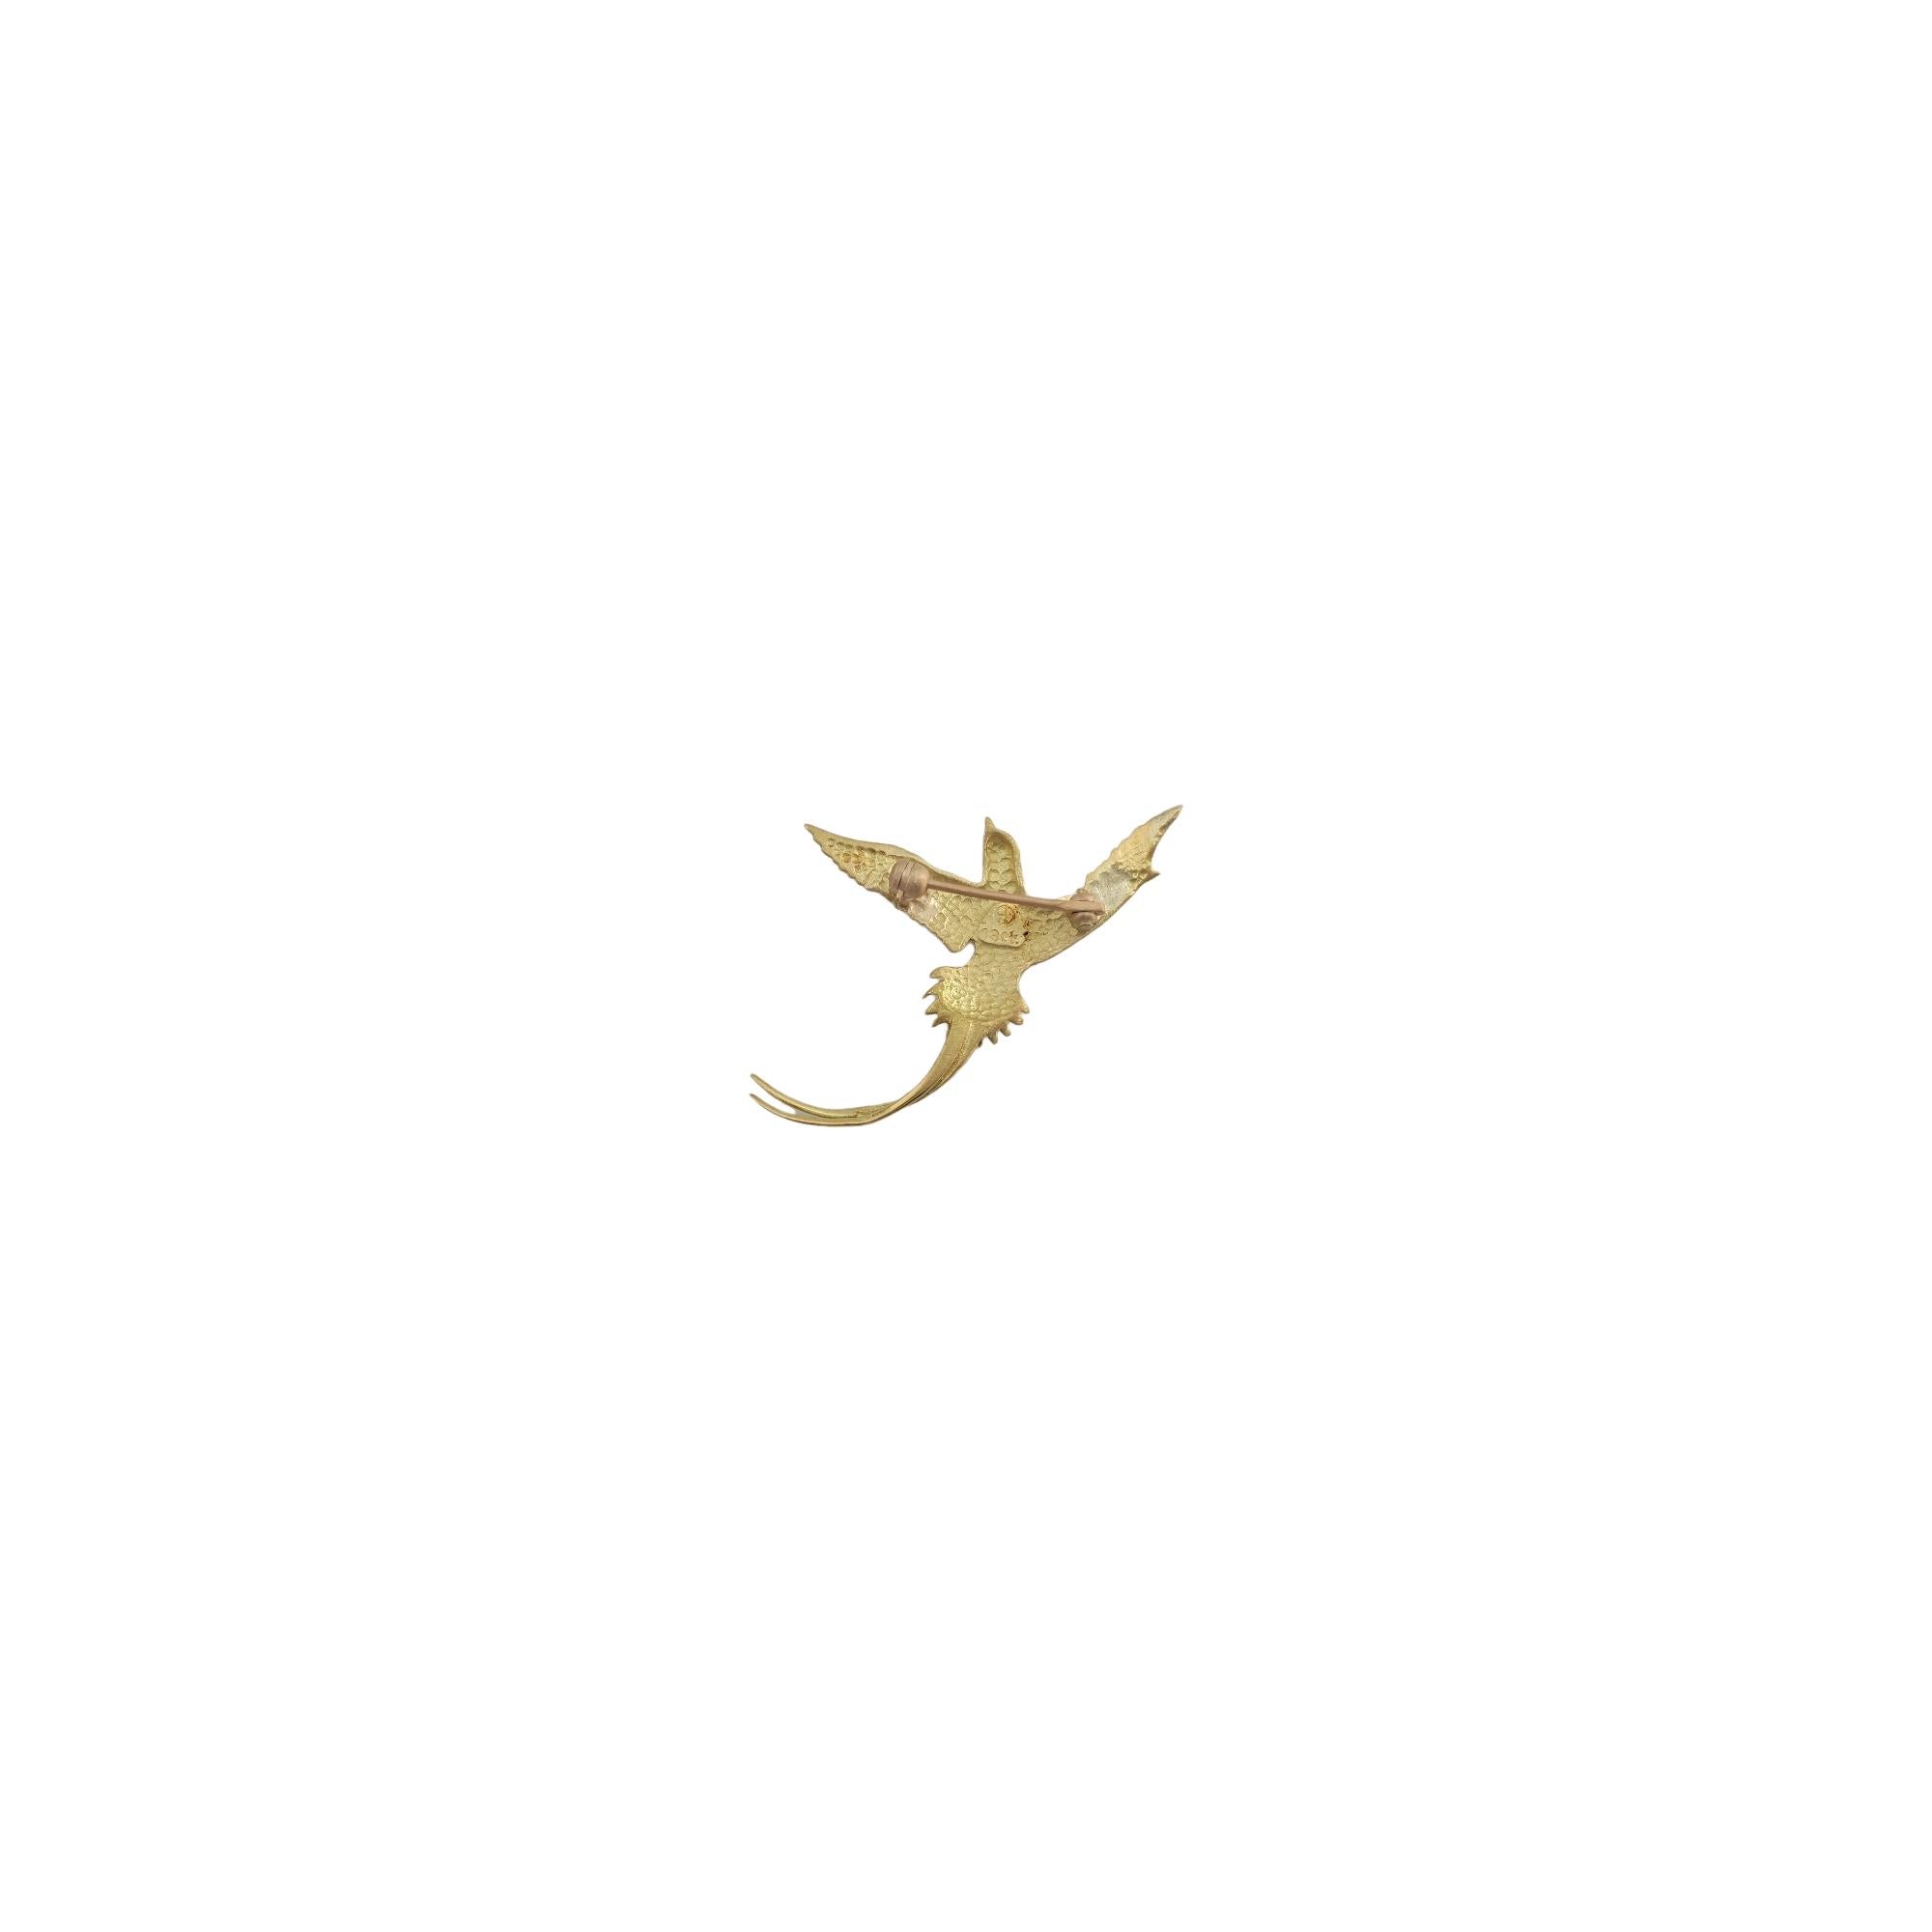 18K Yellow Gold Bermuda Longtail Bird Pin

Intricately designed bird pin in 18K yellow gold with details of feathers.

Size: 29 mm X 28 mm

Weight: 3.2 g/ 2.0 dwt

Hallmark: 18 ct

Very good condition, professionally polished.

Will come packaged in